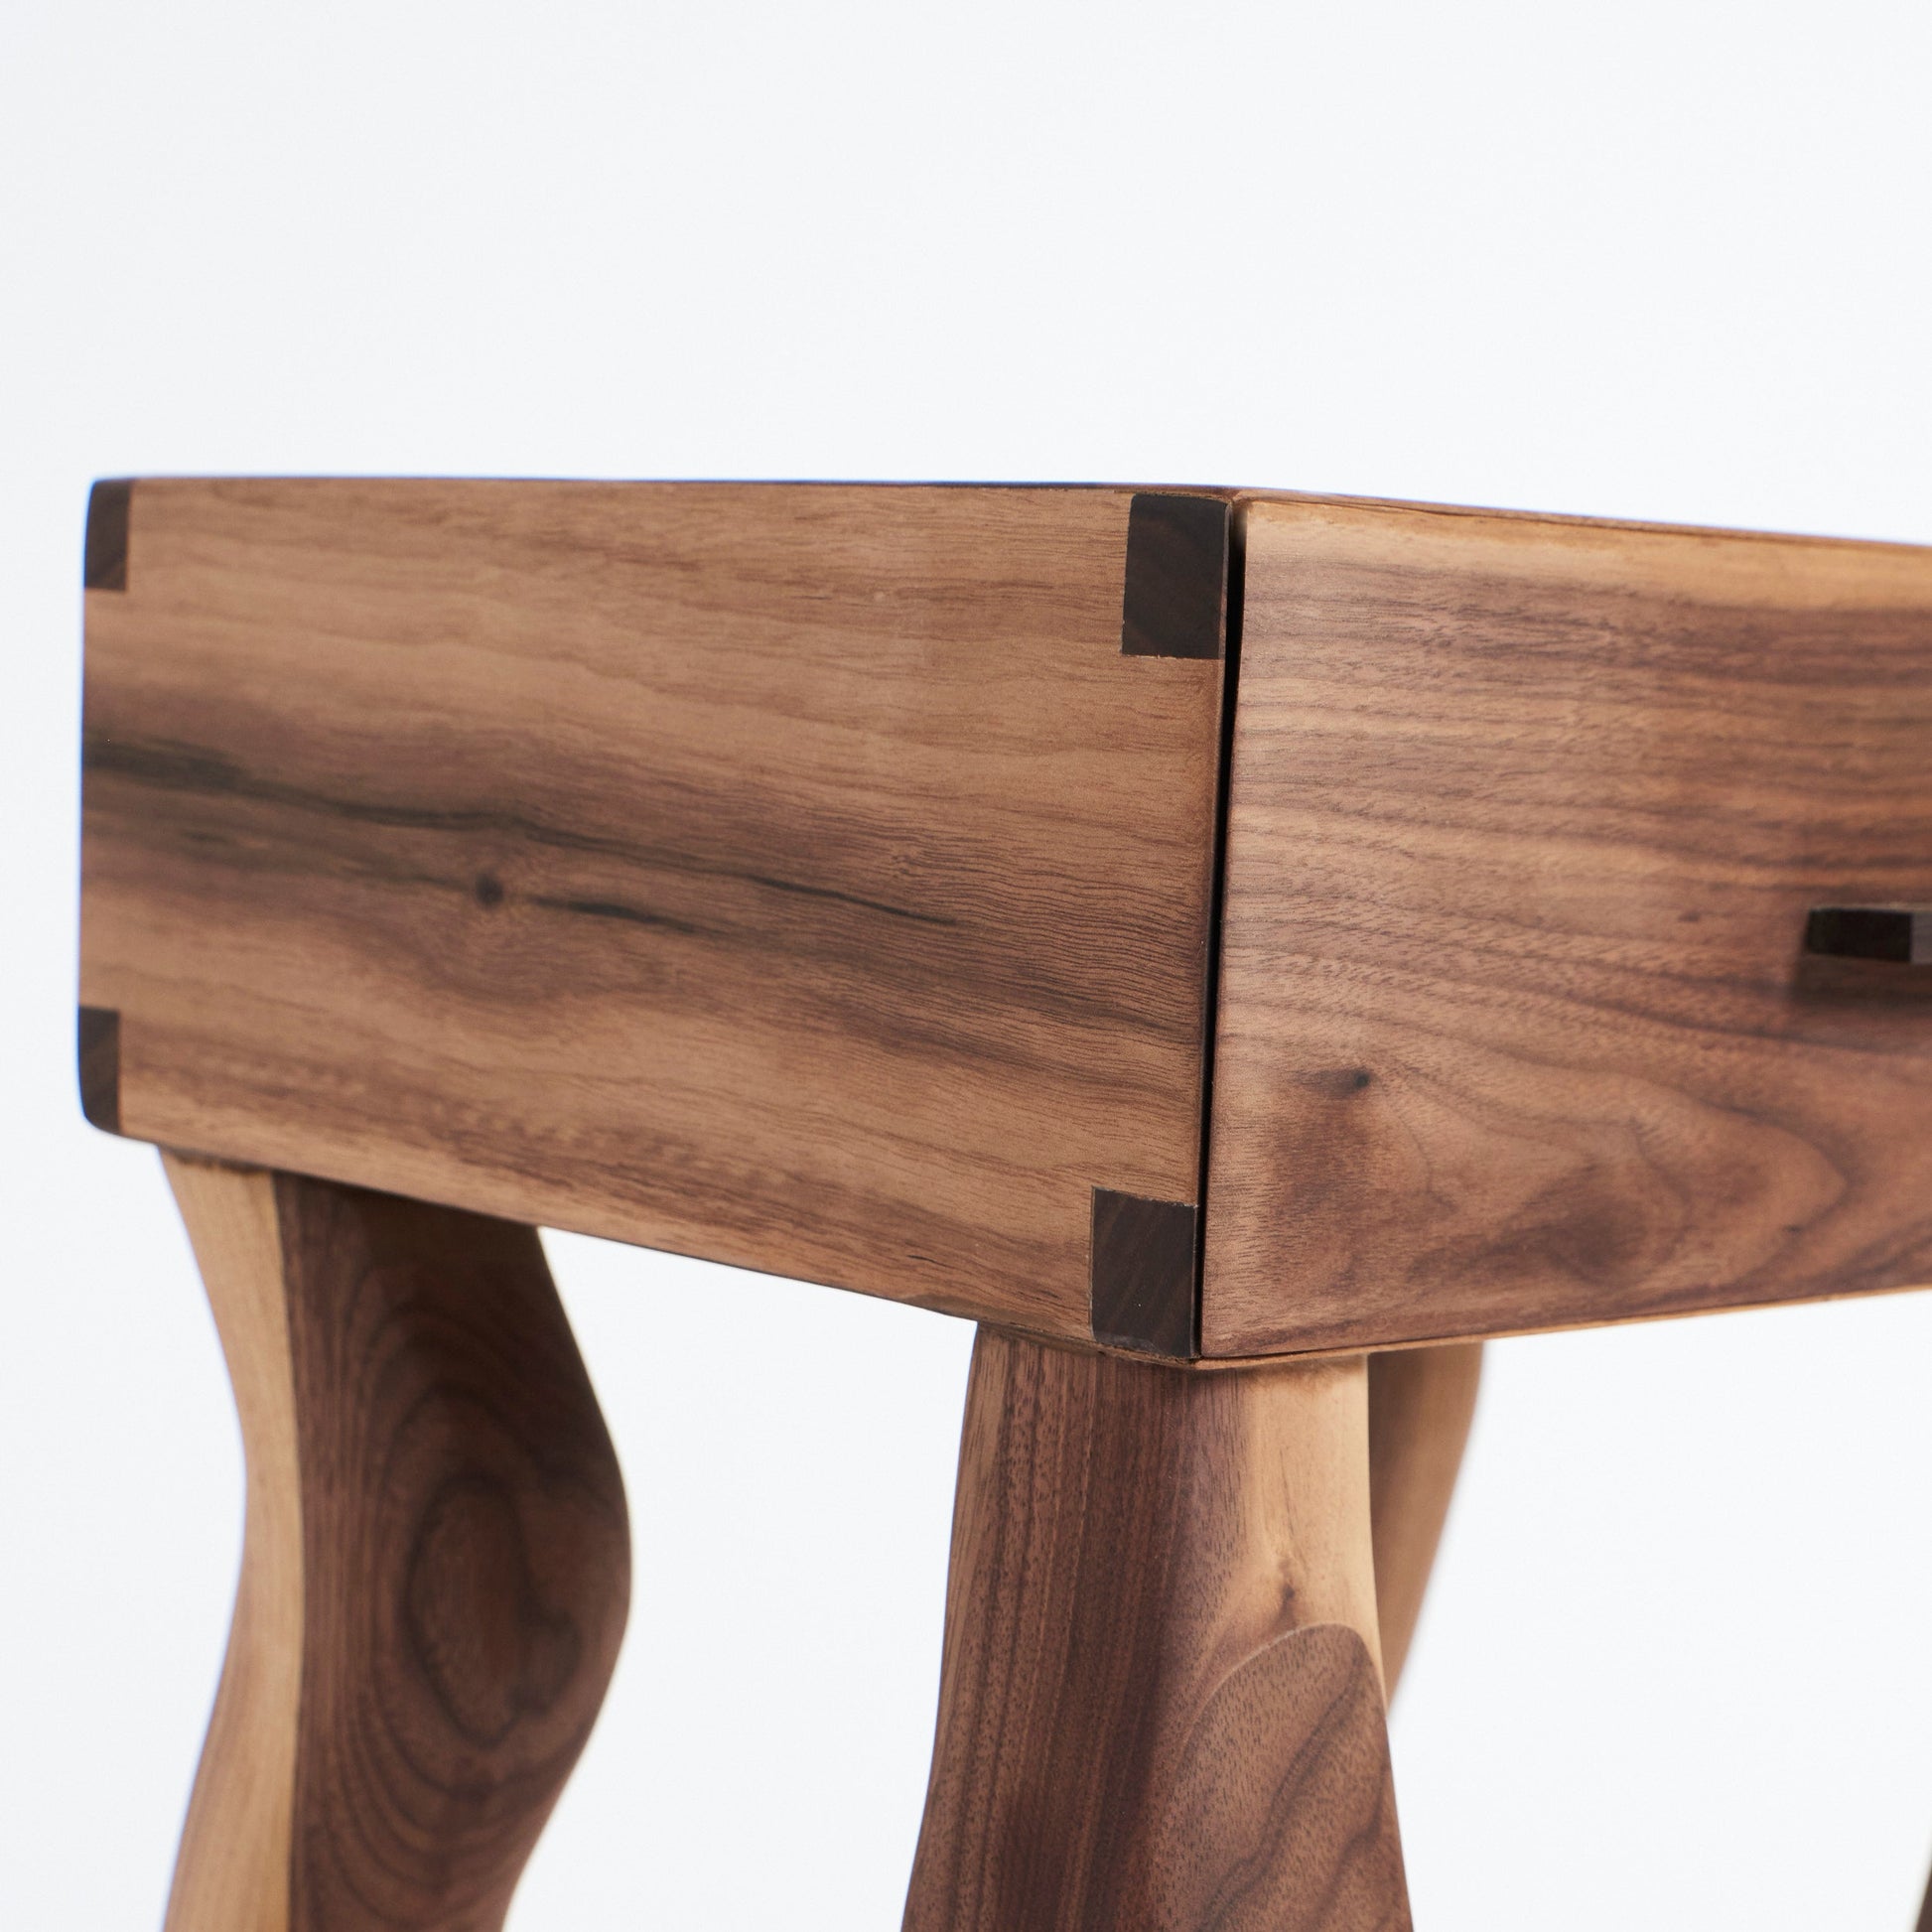 Side Table in Walnut - No Foot End Tables